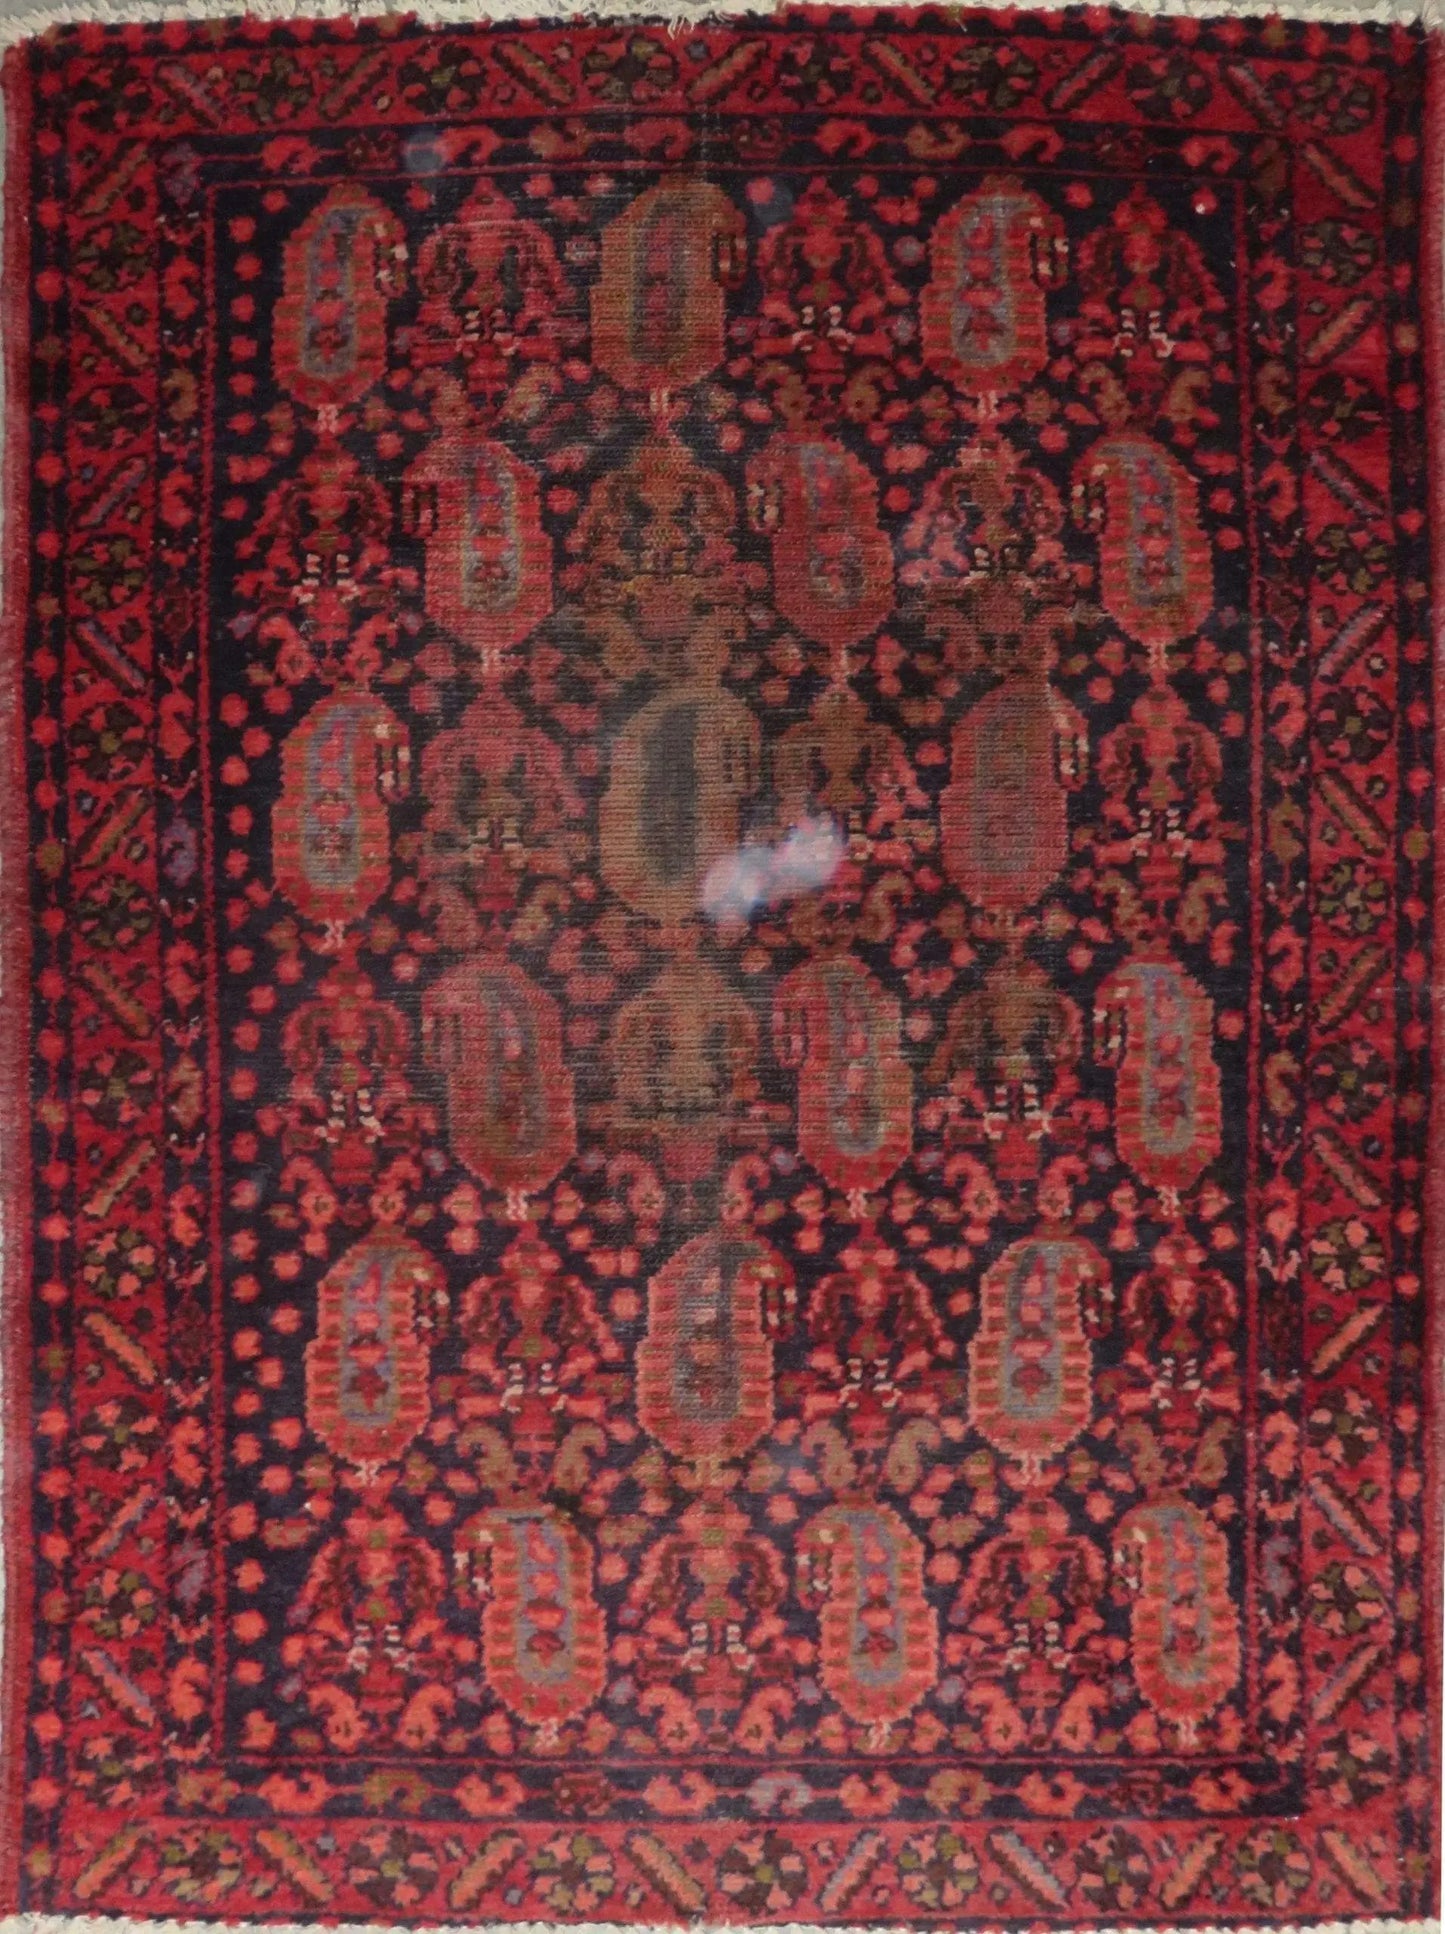 Hand-Knotted Persian Wool Rug _ Luxurious Vintage Design, 4'7" x 3'6", Artisan Crafted